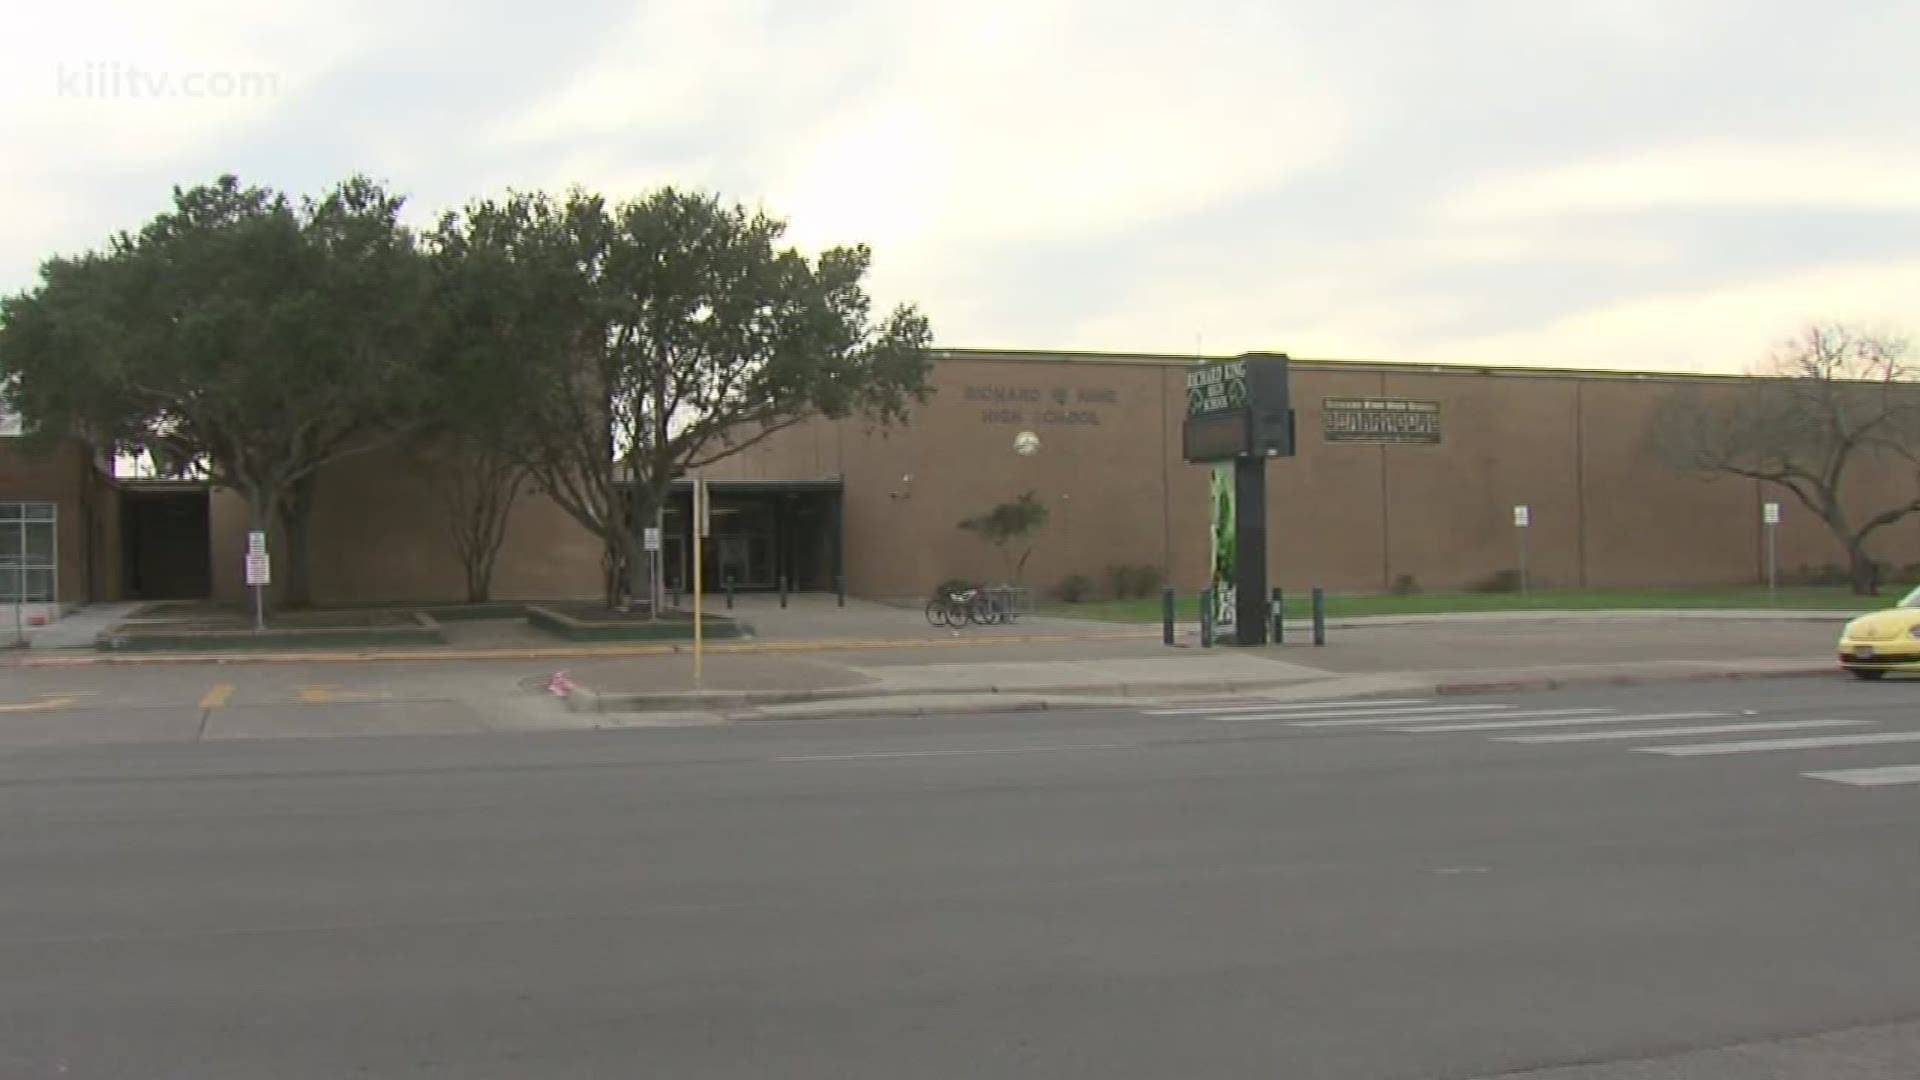 A high school in Corpus Christi was placed on lockdown Thursday as police investigated reports of an armed man walking nearby.